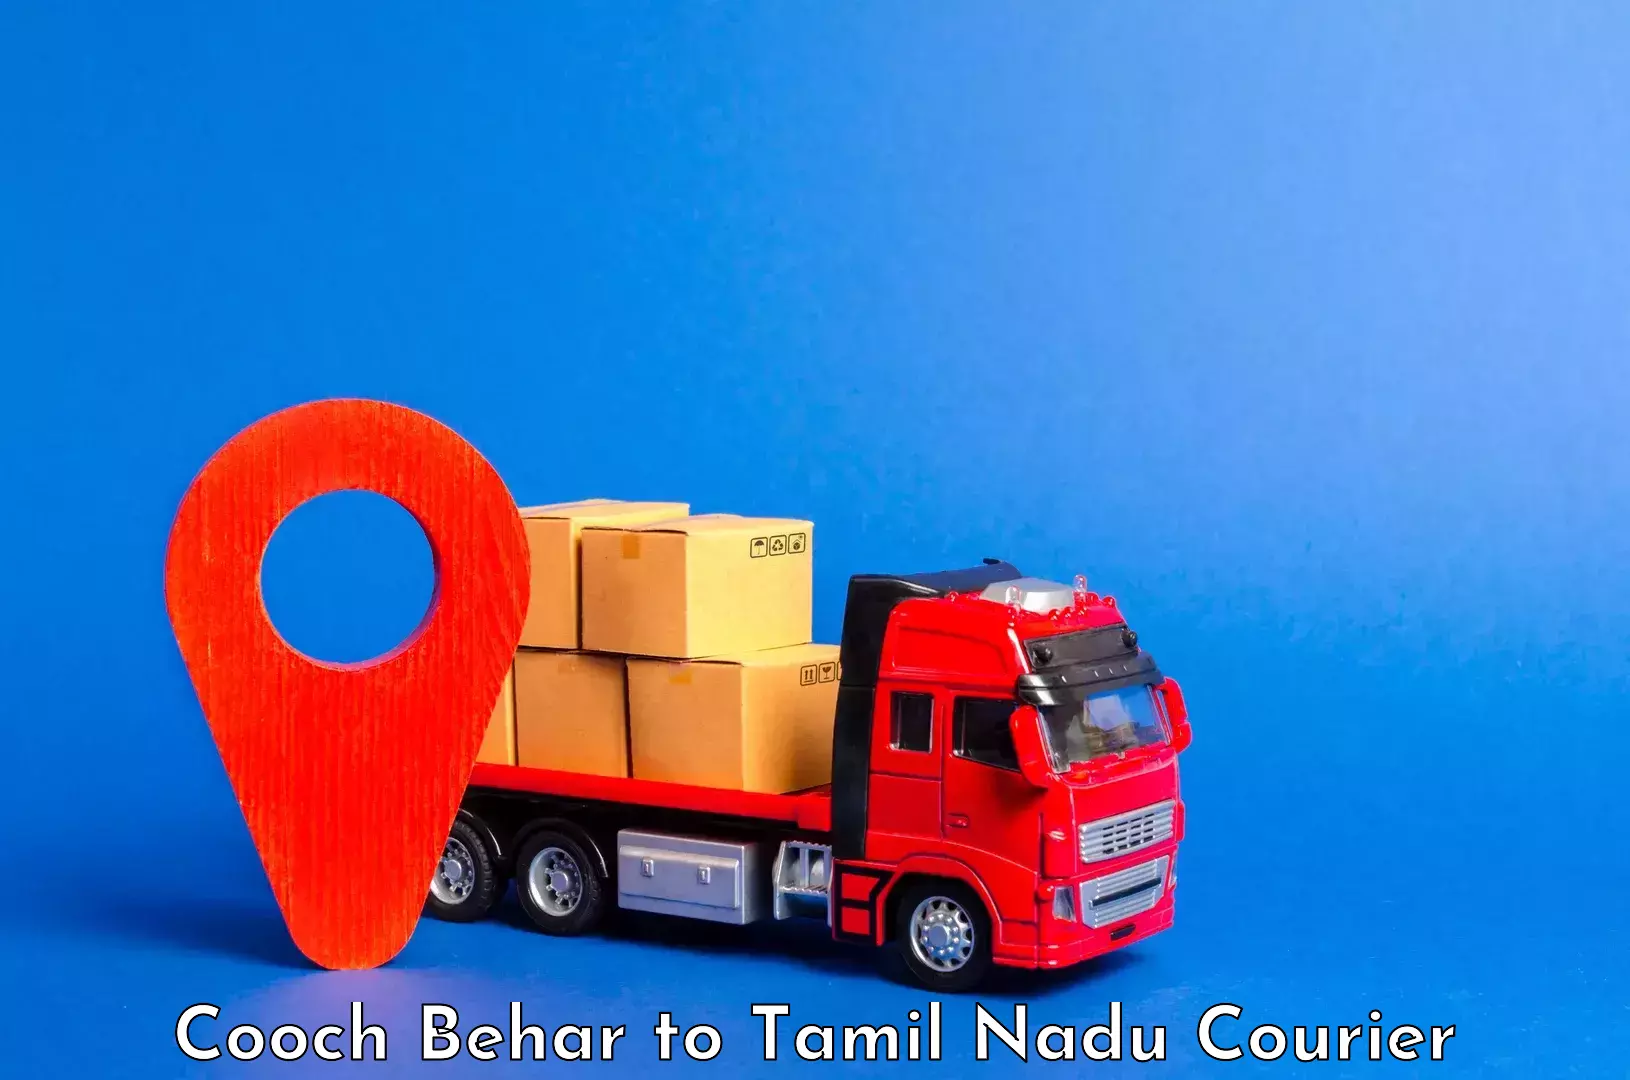 Doorstep luggage pickup Cooch Behar to Shanmugha Arts Science Technology and Research Academy Thanjavur